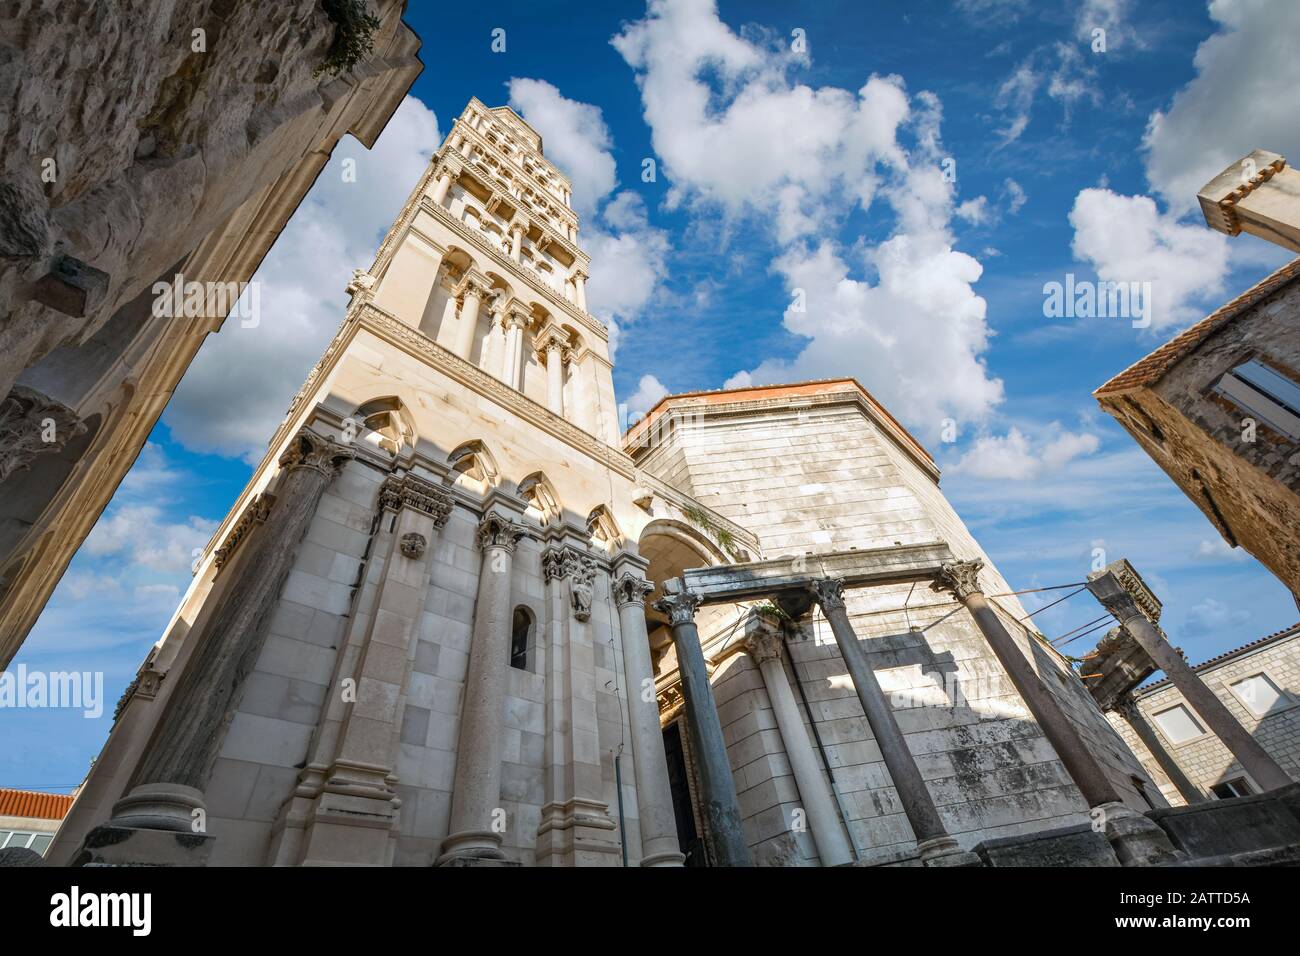 The Saint Domnius Cathedral and bell tower in the Diocletian's Palace Old Town of Split, Croatia. Stock Photo